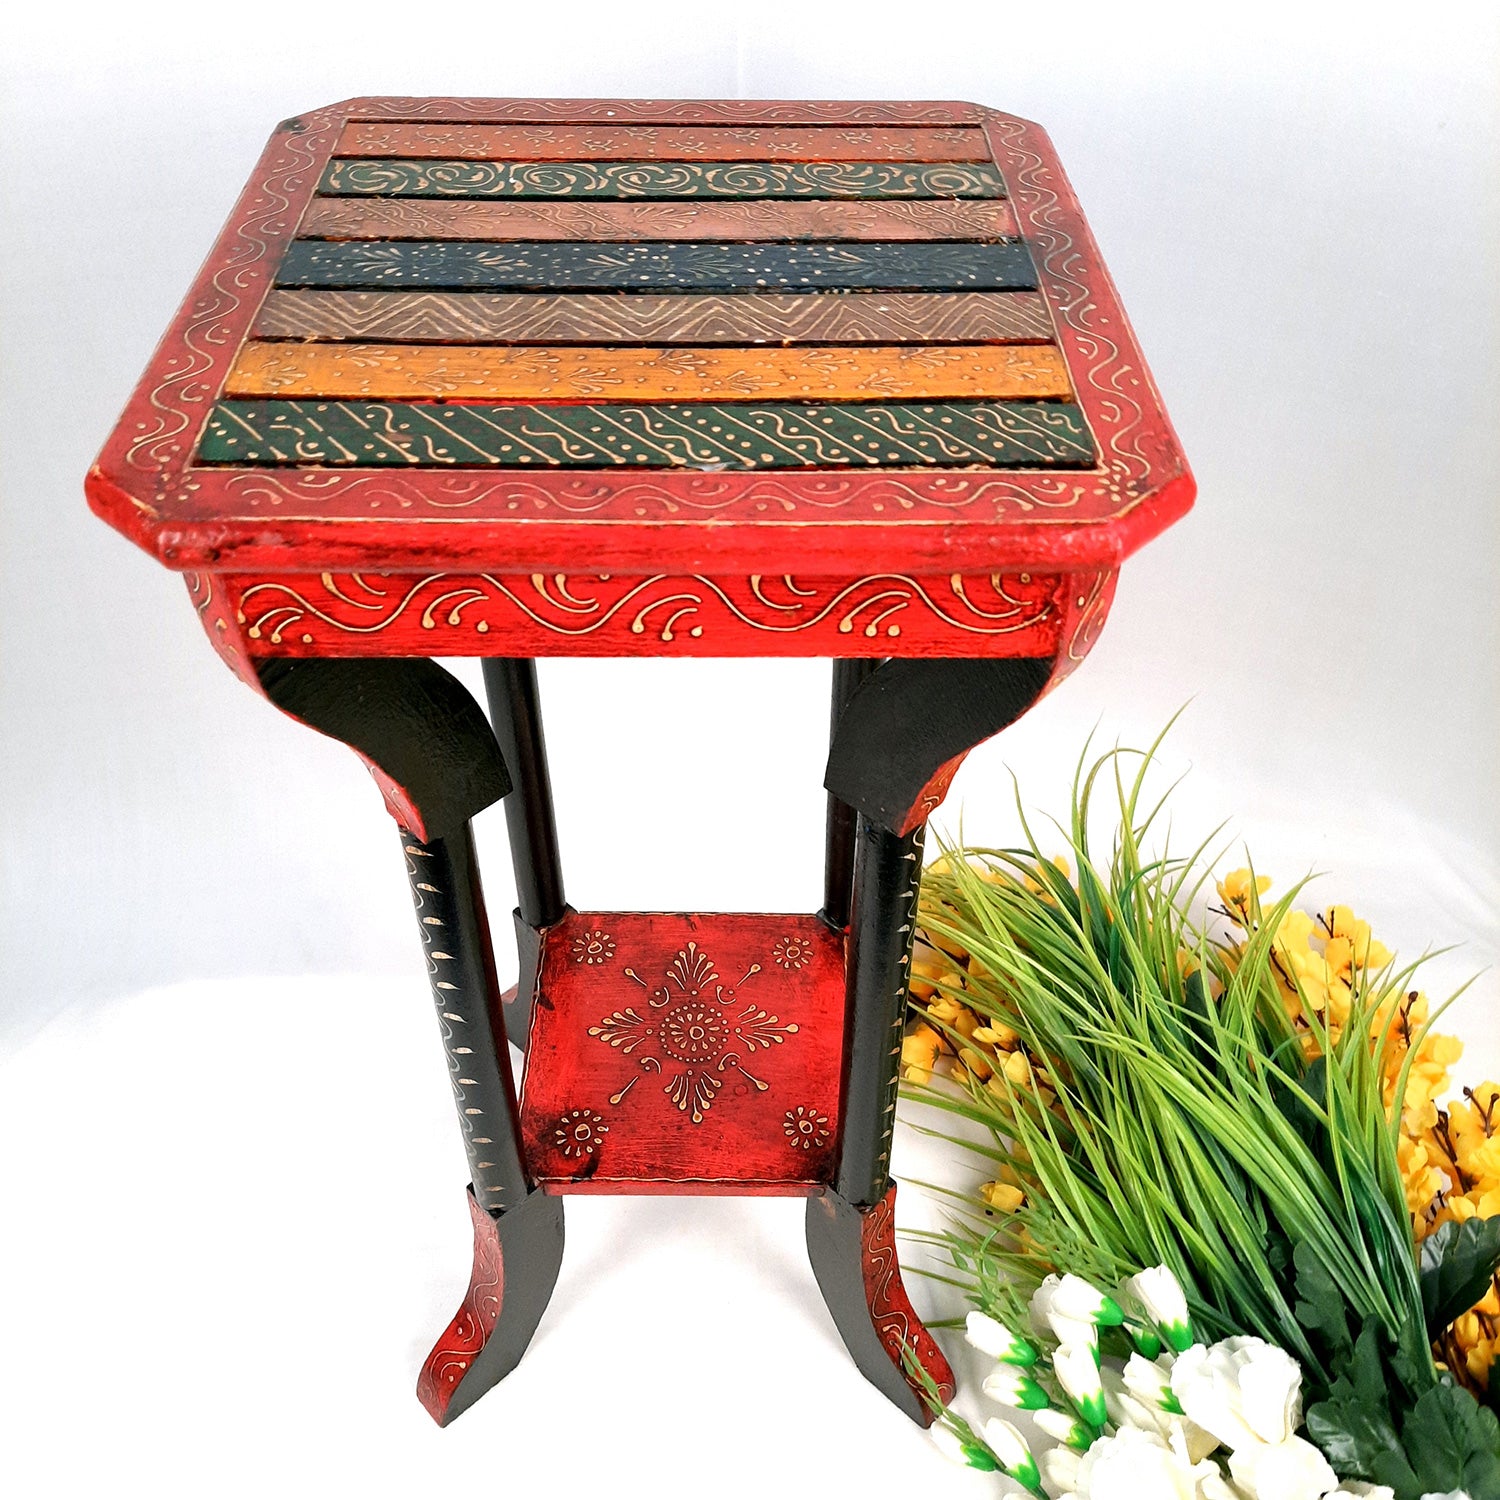 End Tables | Wooden Coffee Table |Side Table for Keeping Lamp, Vases & Plants | Wood Stool for Bedside, Home Decor, Corners, Sofa Side, Office & Gifts - 24 Inch - Apkamart #Color_Black-Red